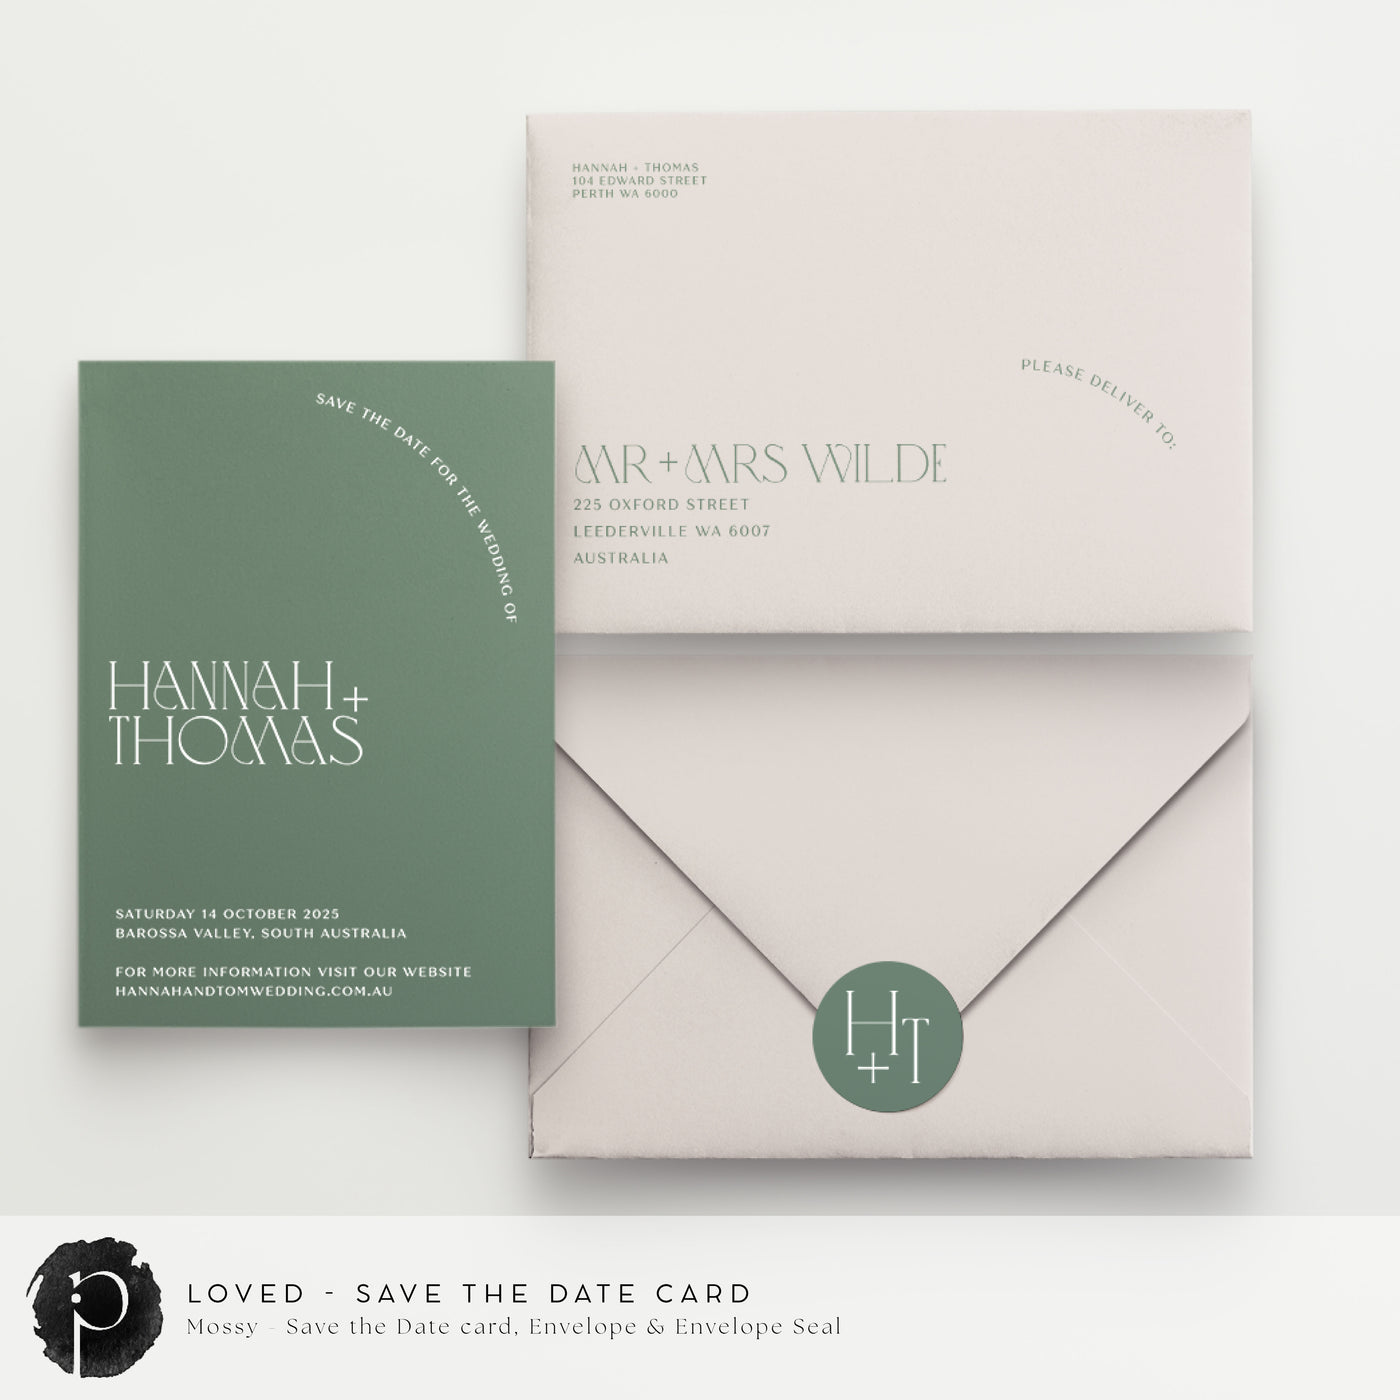 Loved - Save The Date Cards